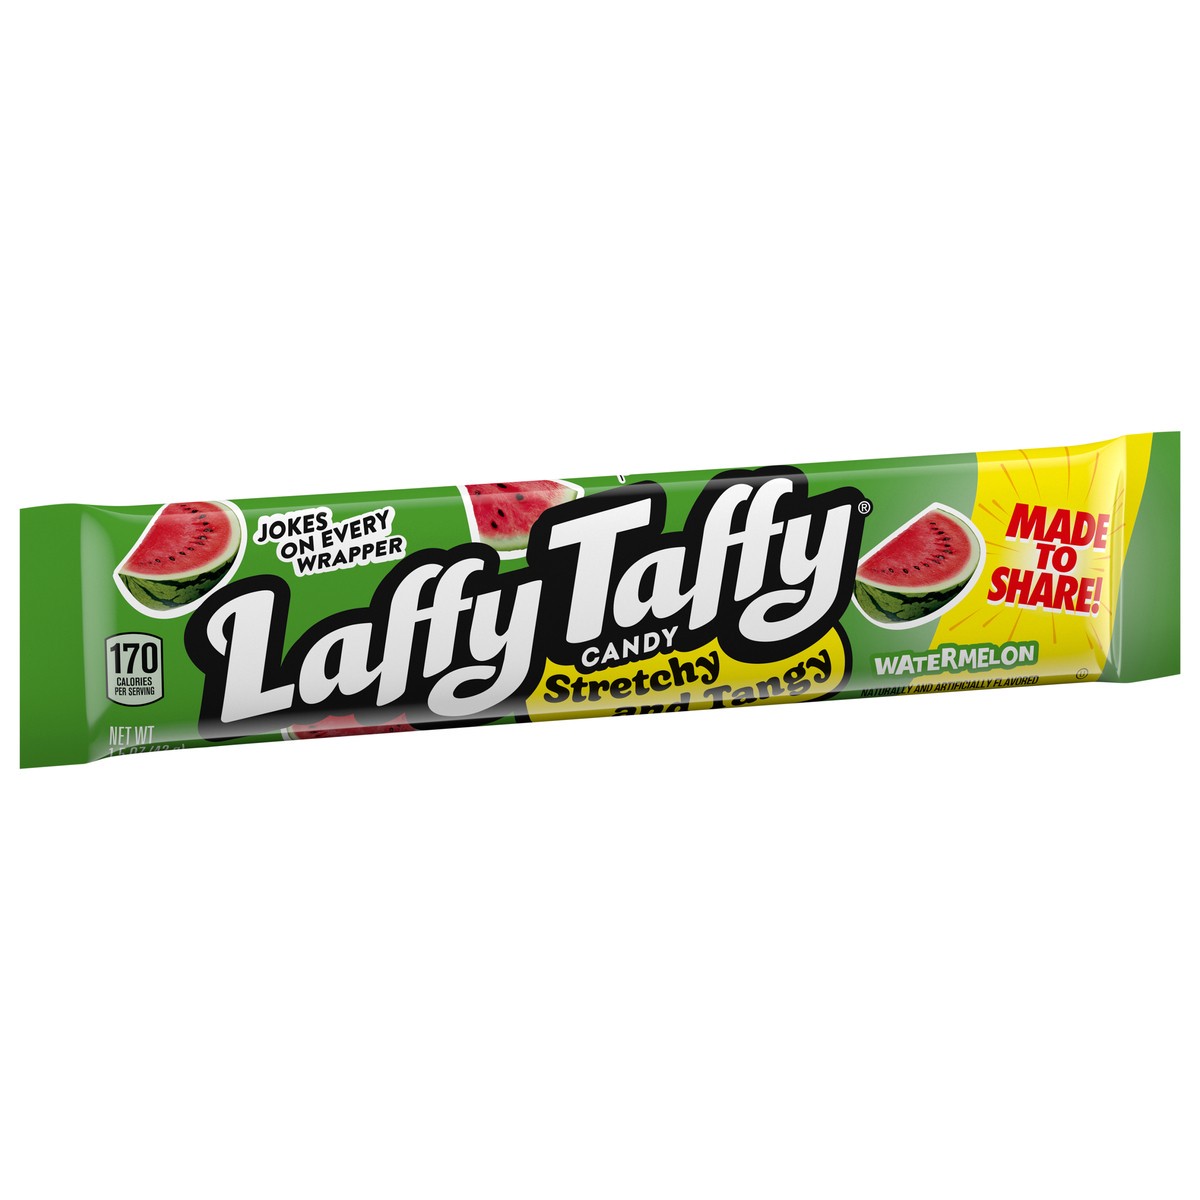 slide 11 of 13, Laffy Taffy Stretchy and Tangy Watermelon 71439 158370 1.5 oz, 1.5 oz